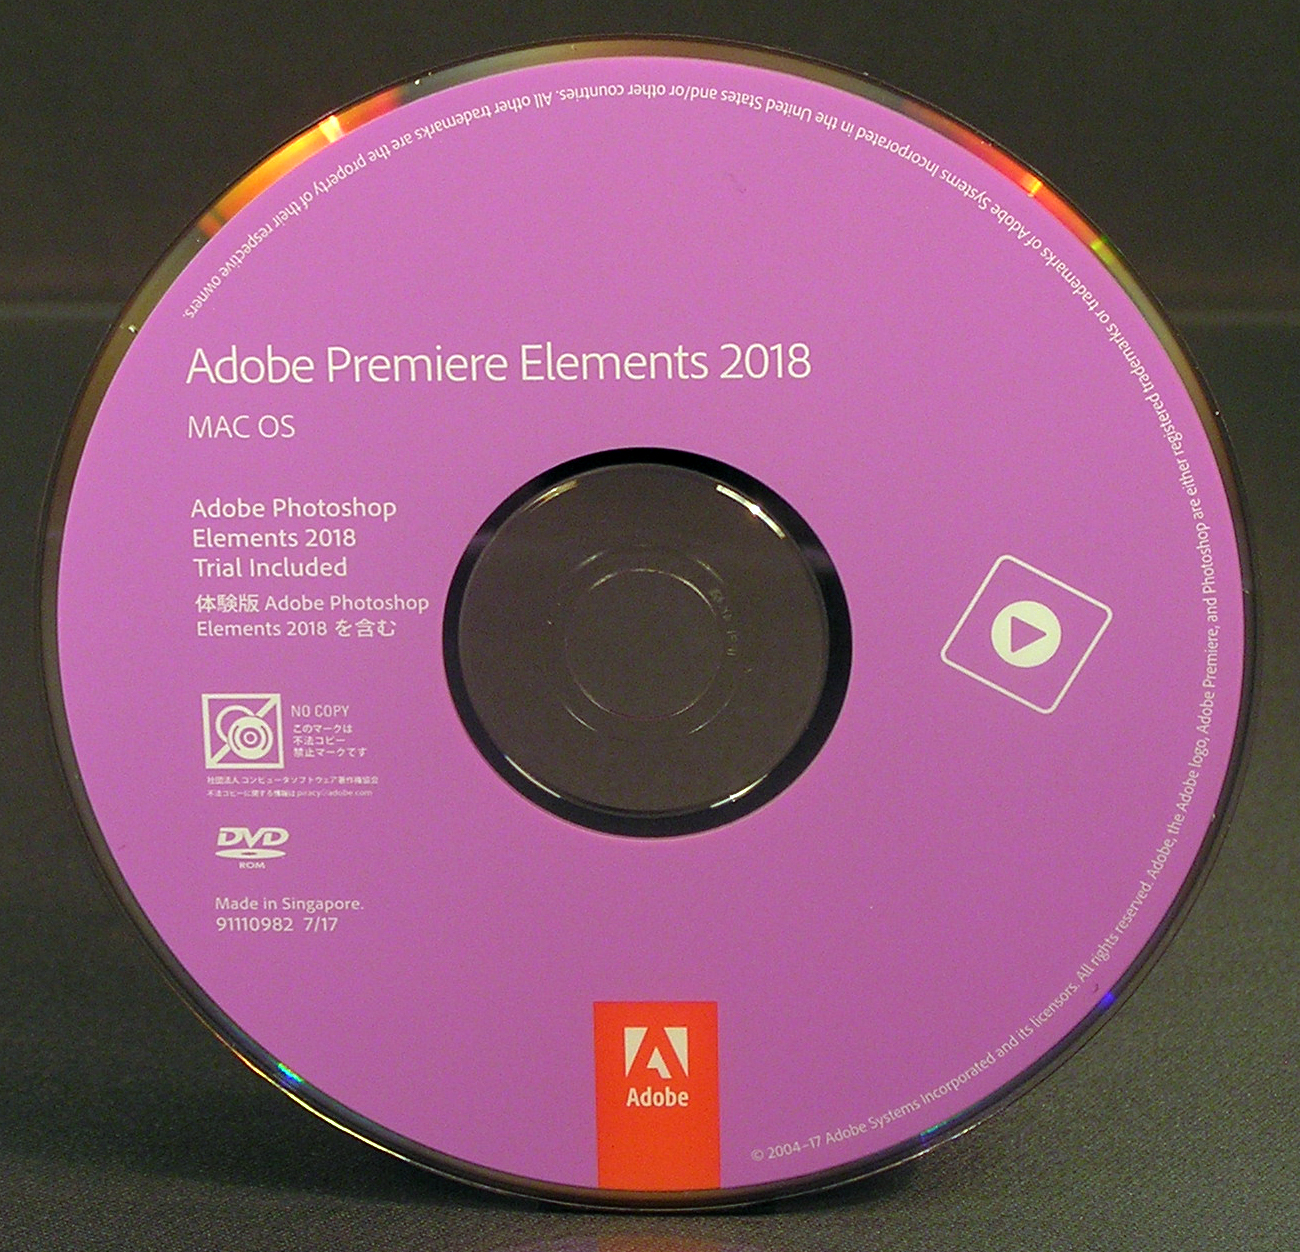 adobe premiere elements 2018 flac support